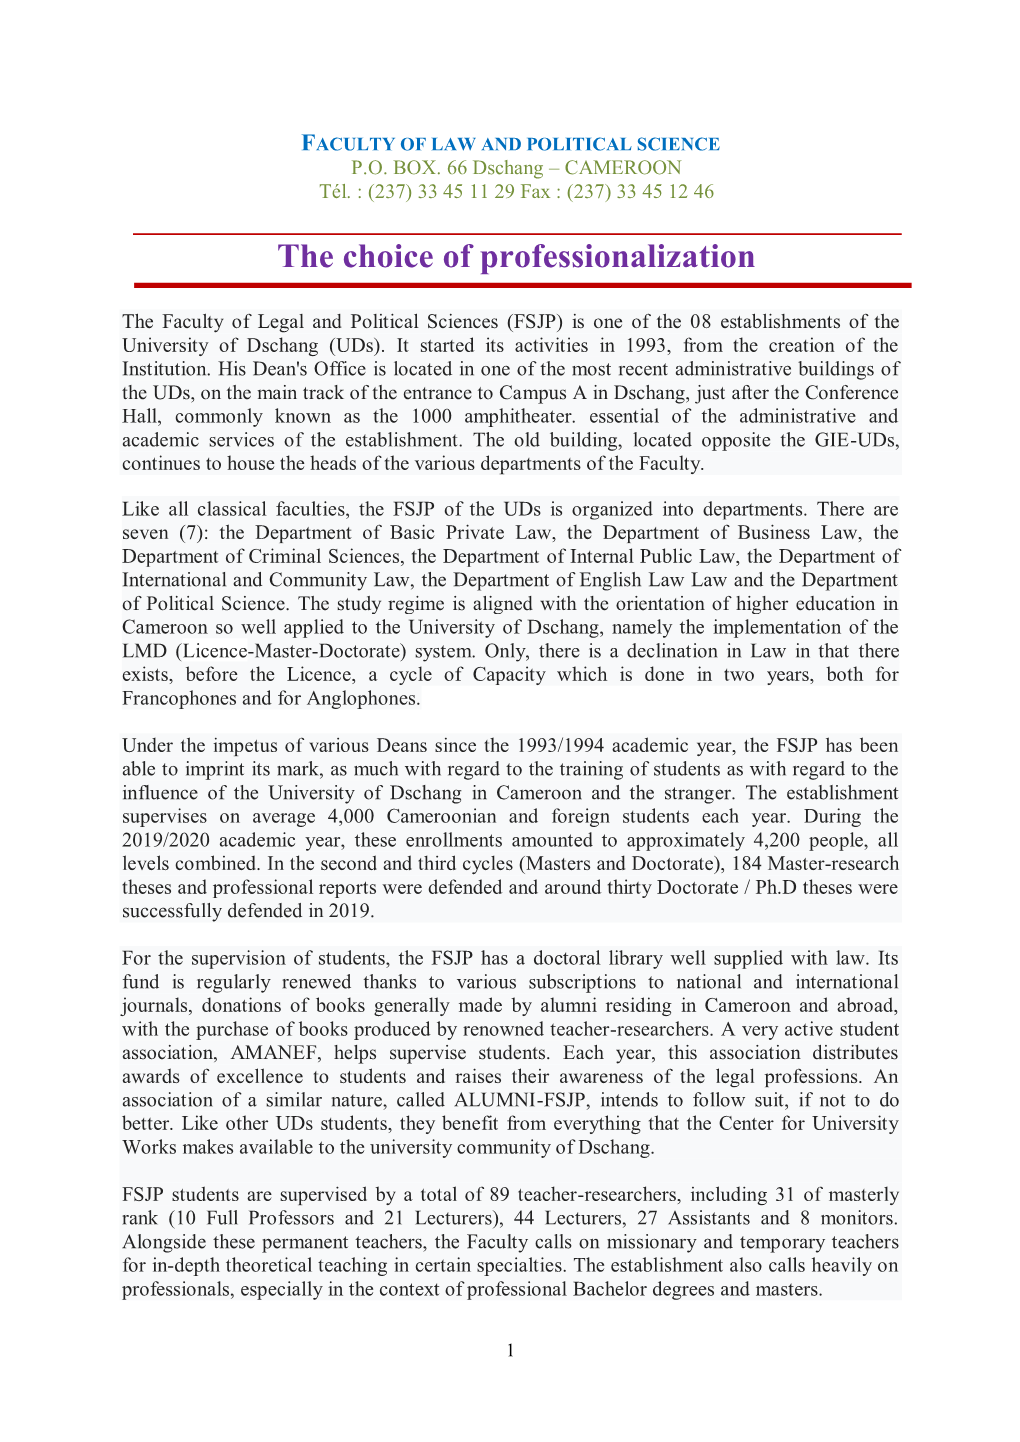 The Choice of Professionalization